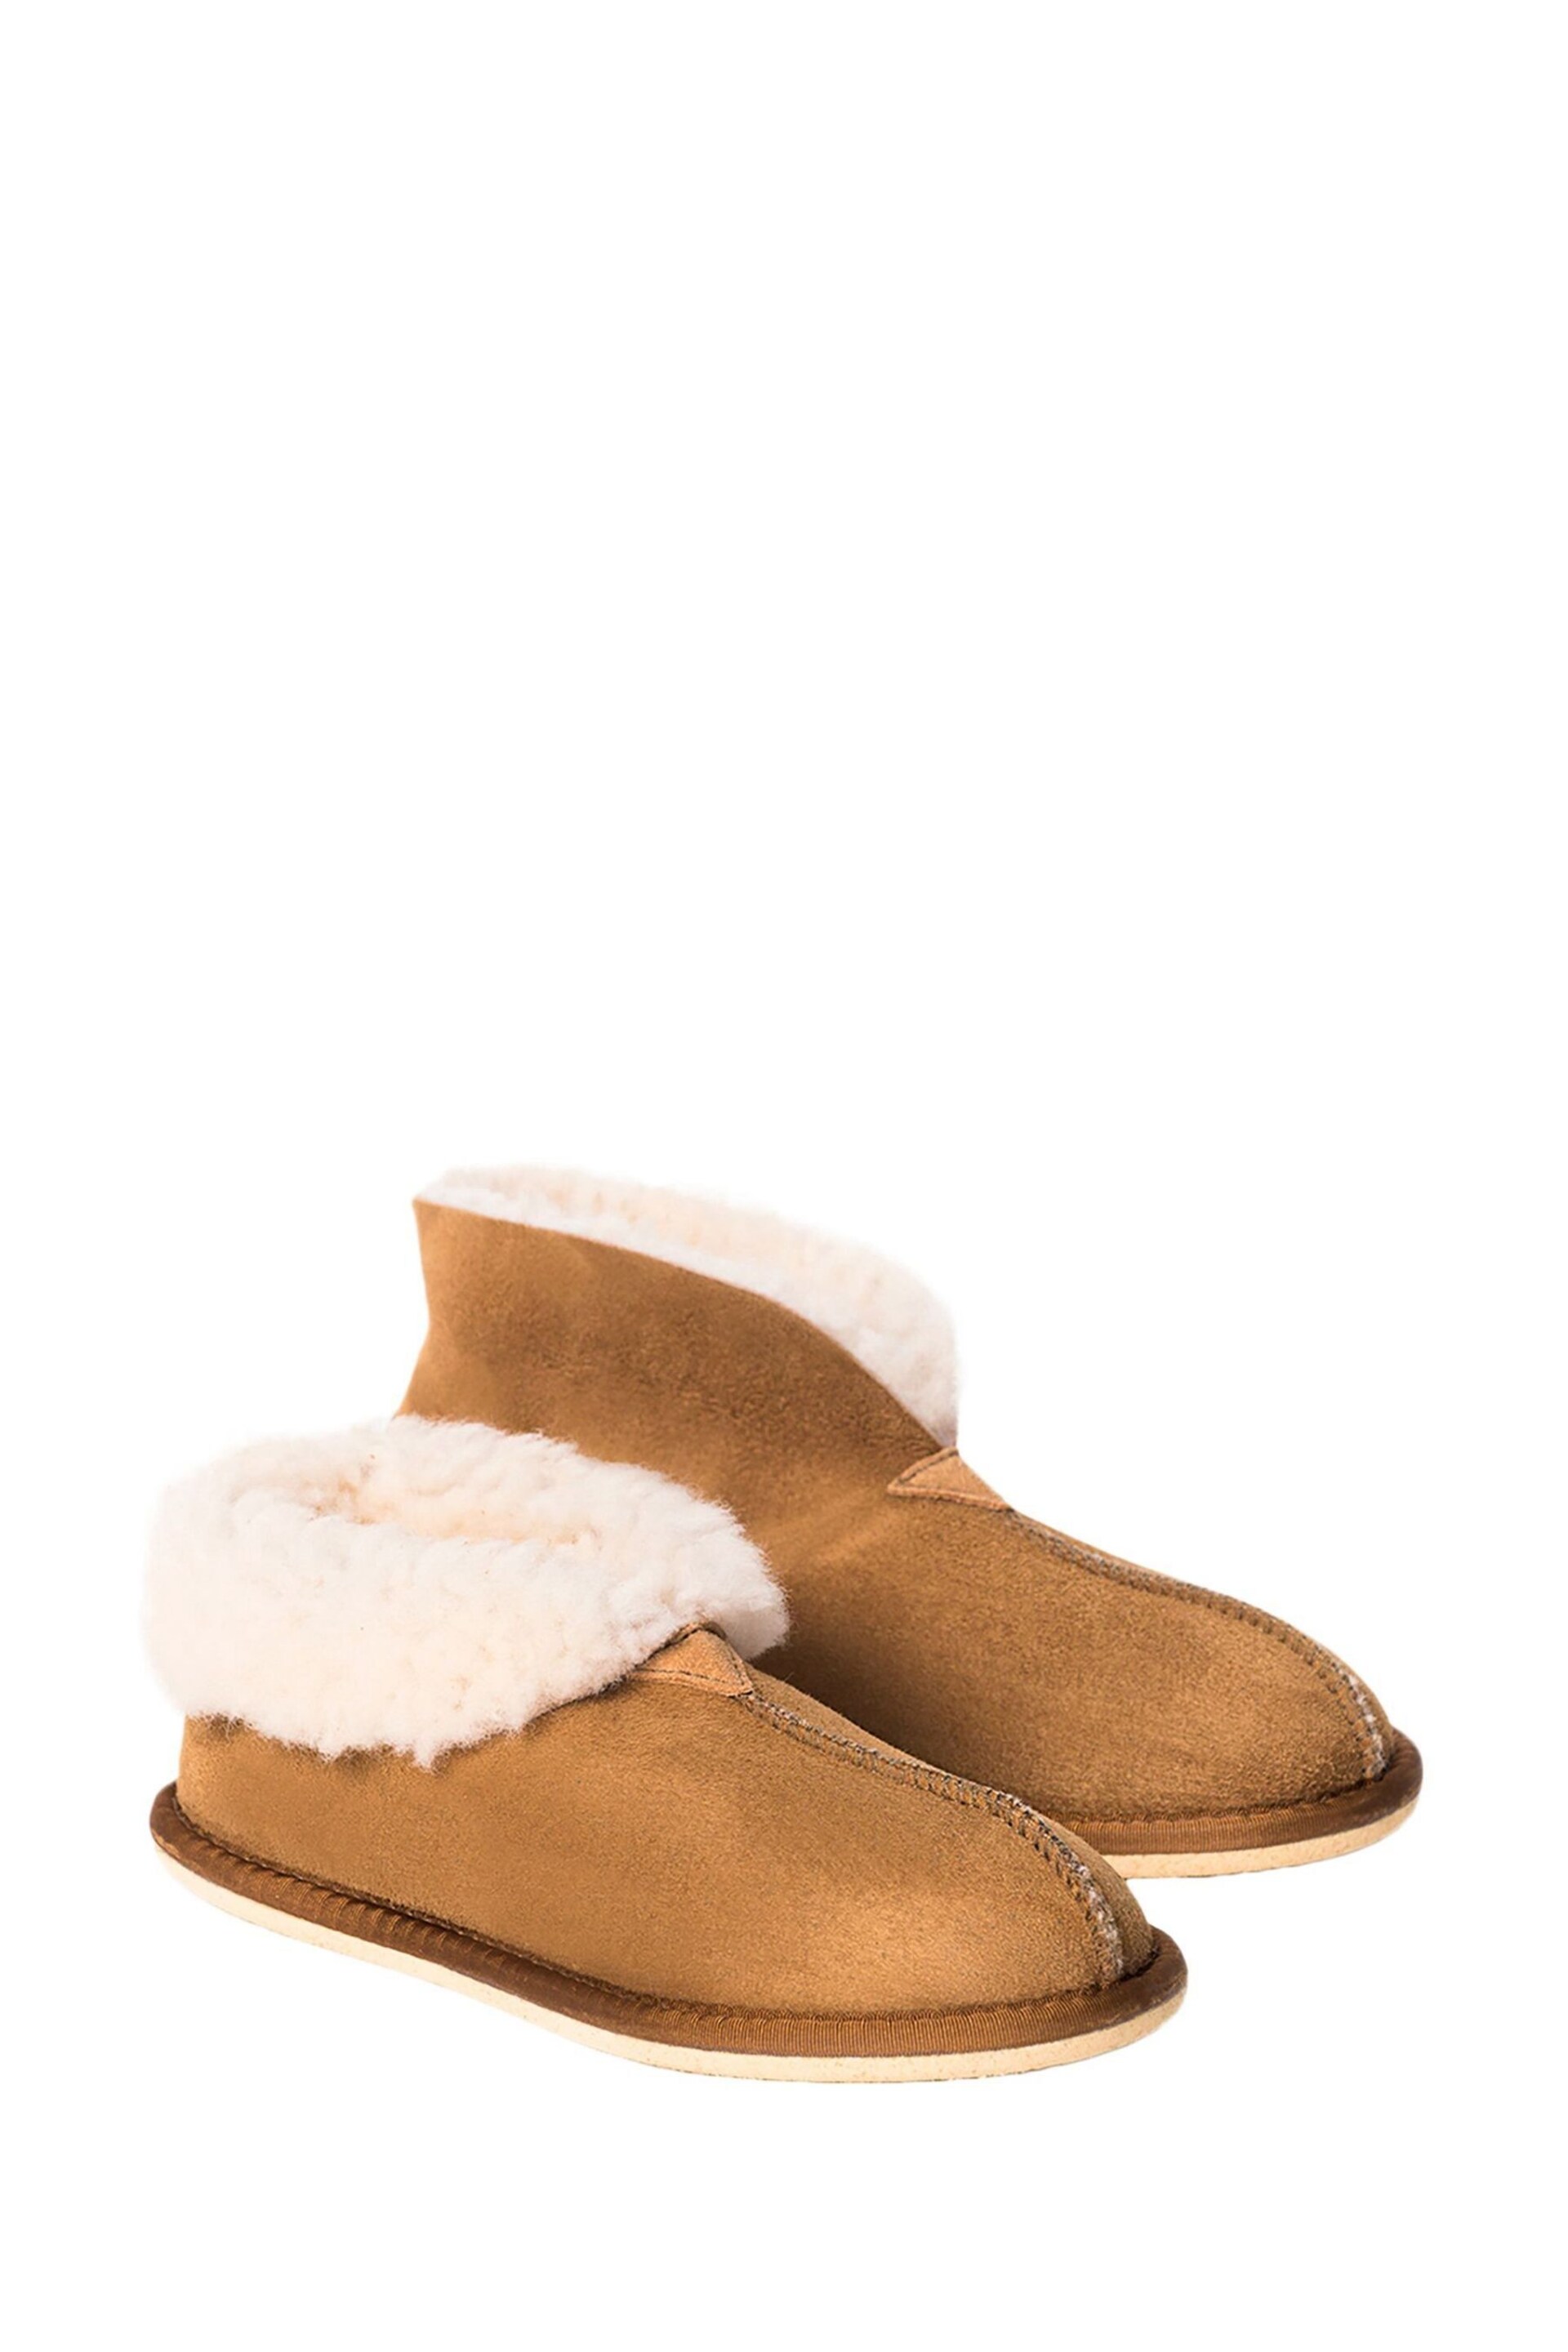 Celtic & Co. Ladies Sheepskin Bootee Slippers - Image 3 of 4